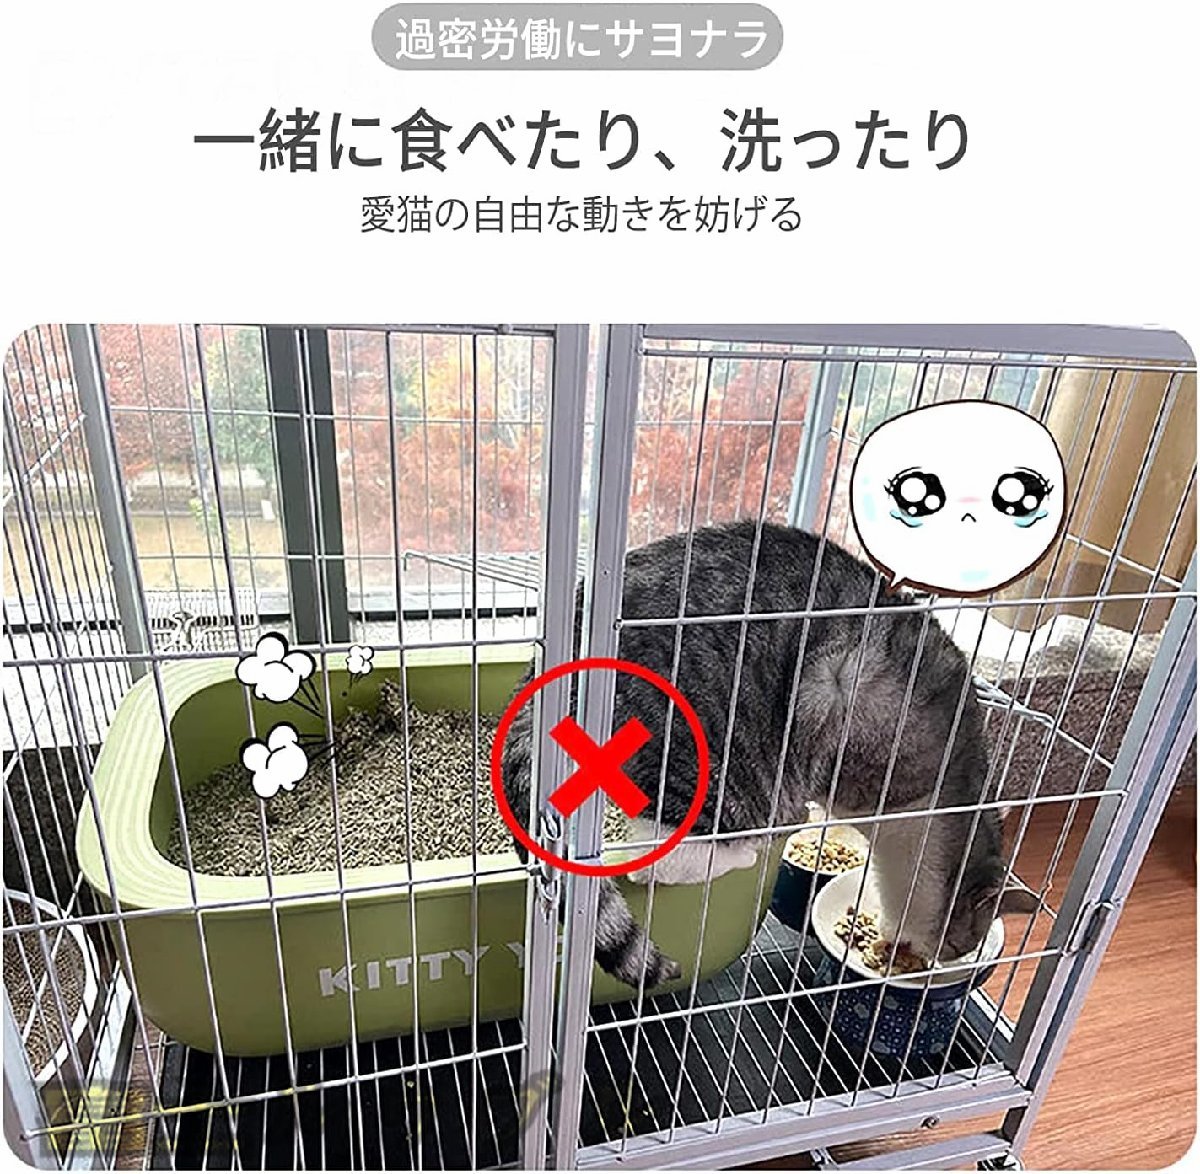  practical use * cat cage toilet attaching large metal small shop .. cat cage 2 step 3 step interior .. protection removed possibility large Space interior ..75x49x111CM